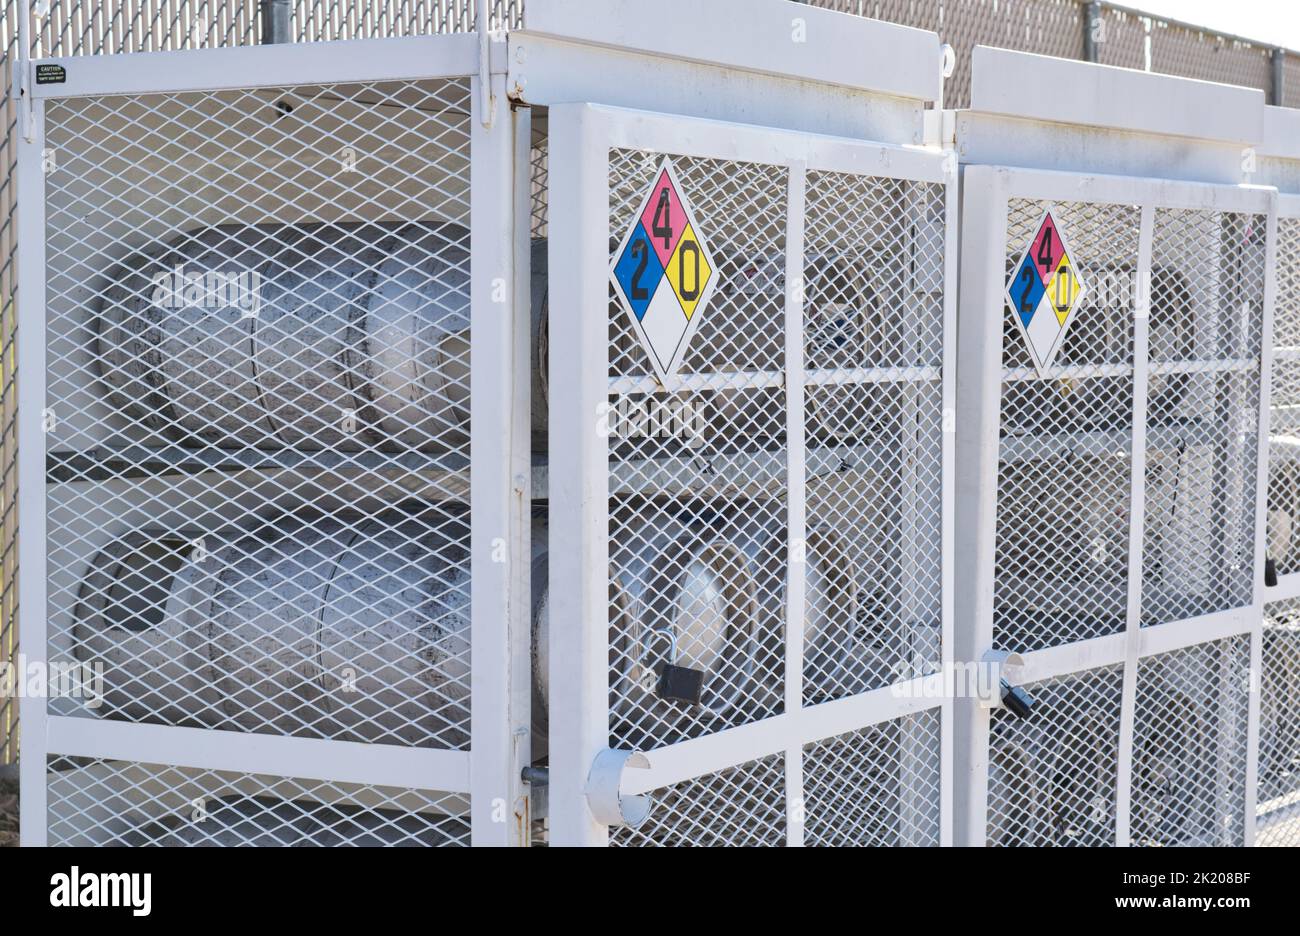 Houston, Texas USA 09-18-2022: Liquid Petroleum gas cylinders stored horizontally in metal safety cages with chemical hazard signs. Stock Photo